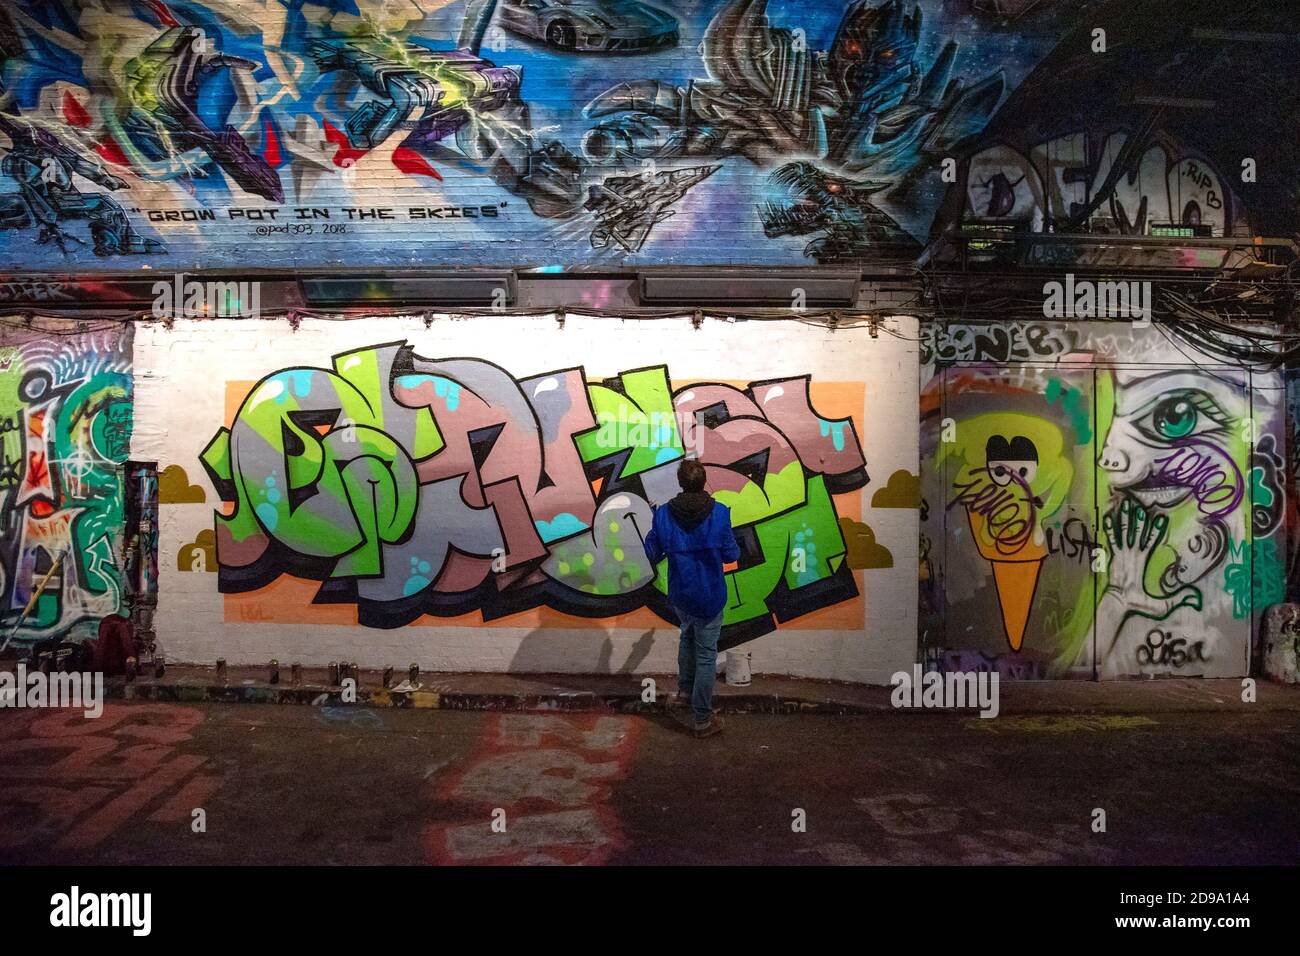 London Uk 3rd Nov A Graffiti Artist Seen Painting At The Famous Leake Street Tunnel Under Waterloo Station Credit Dave Rushen Sopa Images Zuma Wire Alamy Live News Stock Photo Alamy